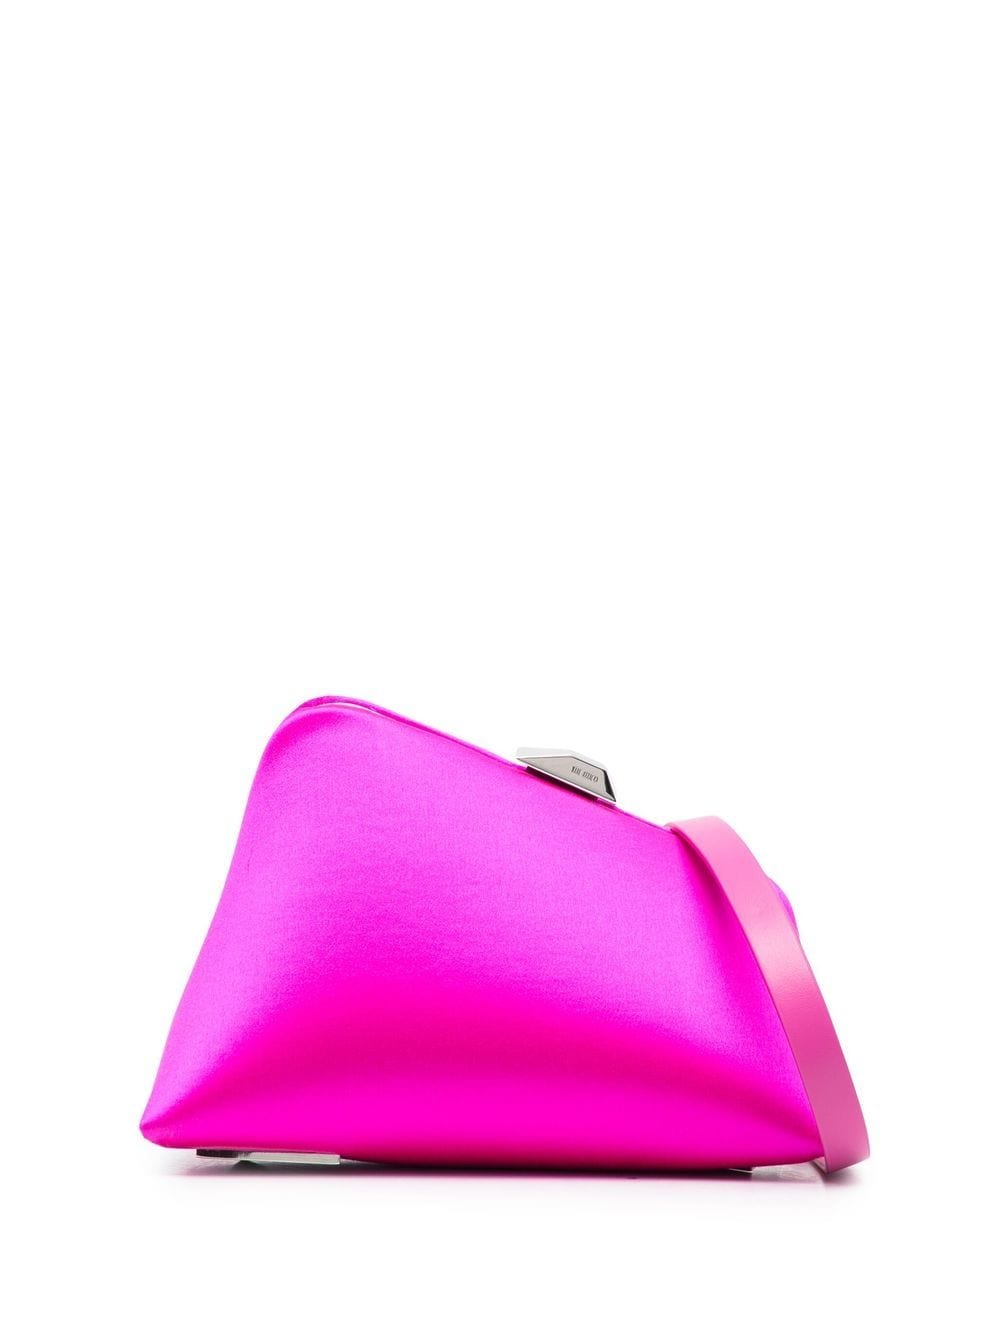 8.30PM Logo-Print Clutch in Fuchsia for Women in Satin, Leather, and Silk